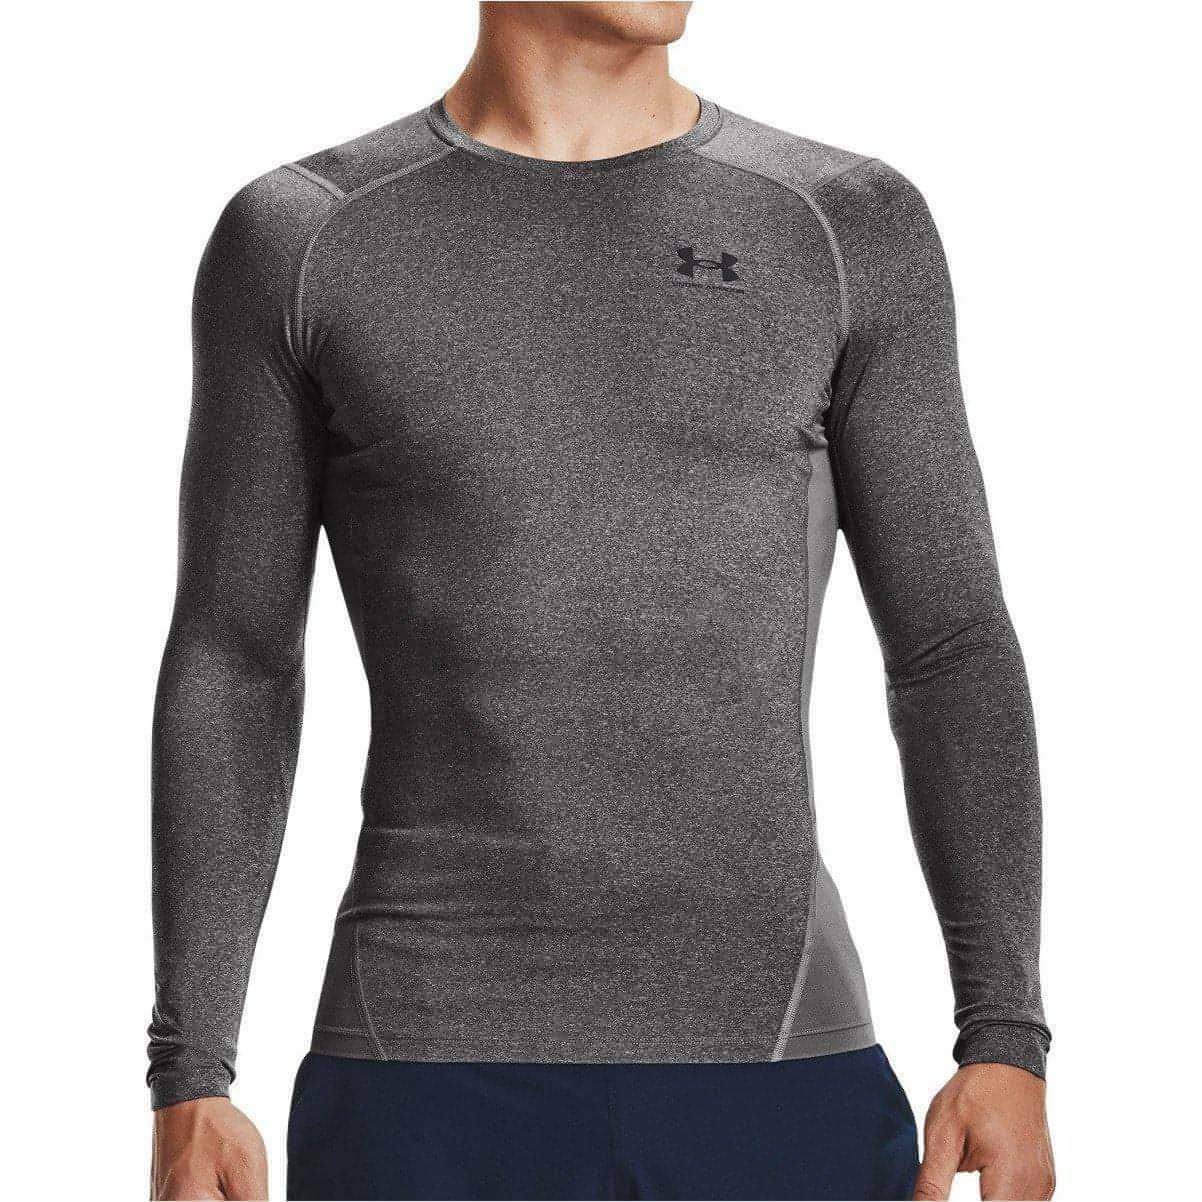 Under Armour Heatgear Armour Long Sleeve Mens Compression Top - Grey - Start Fitness